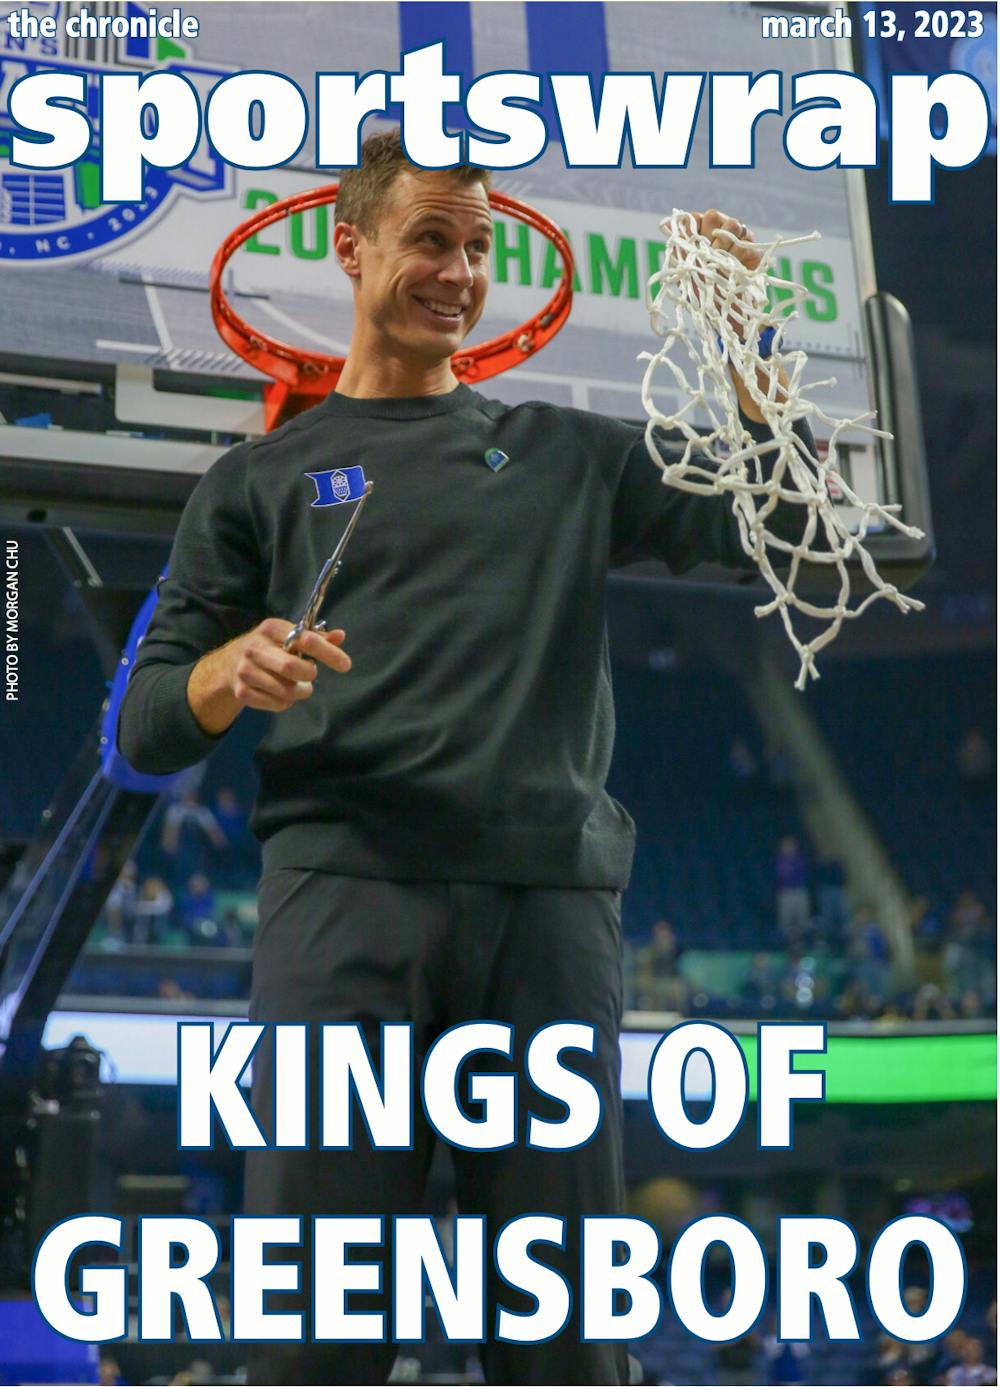 Duke men's basketball won the ACC tournament for the first time since 2019.